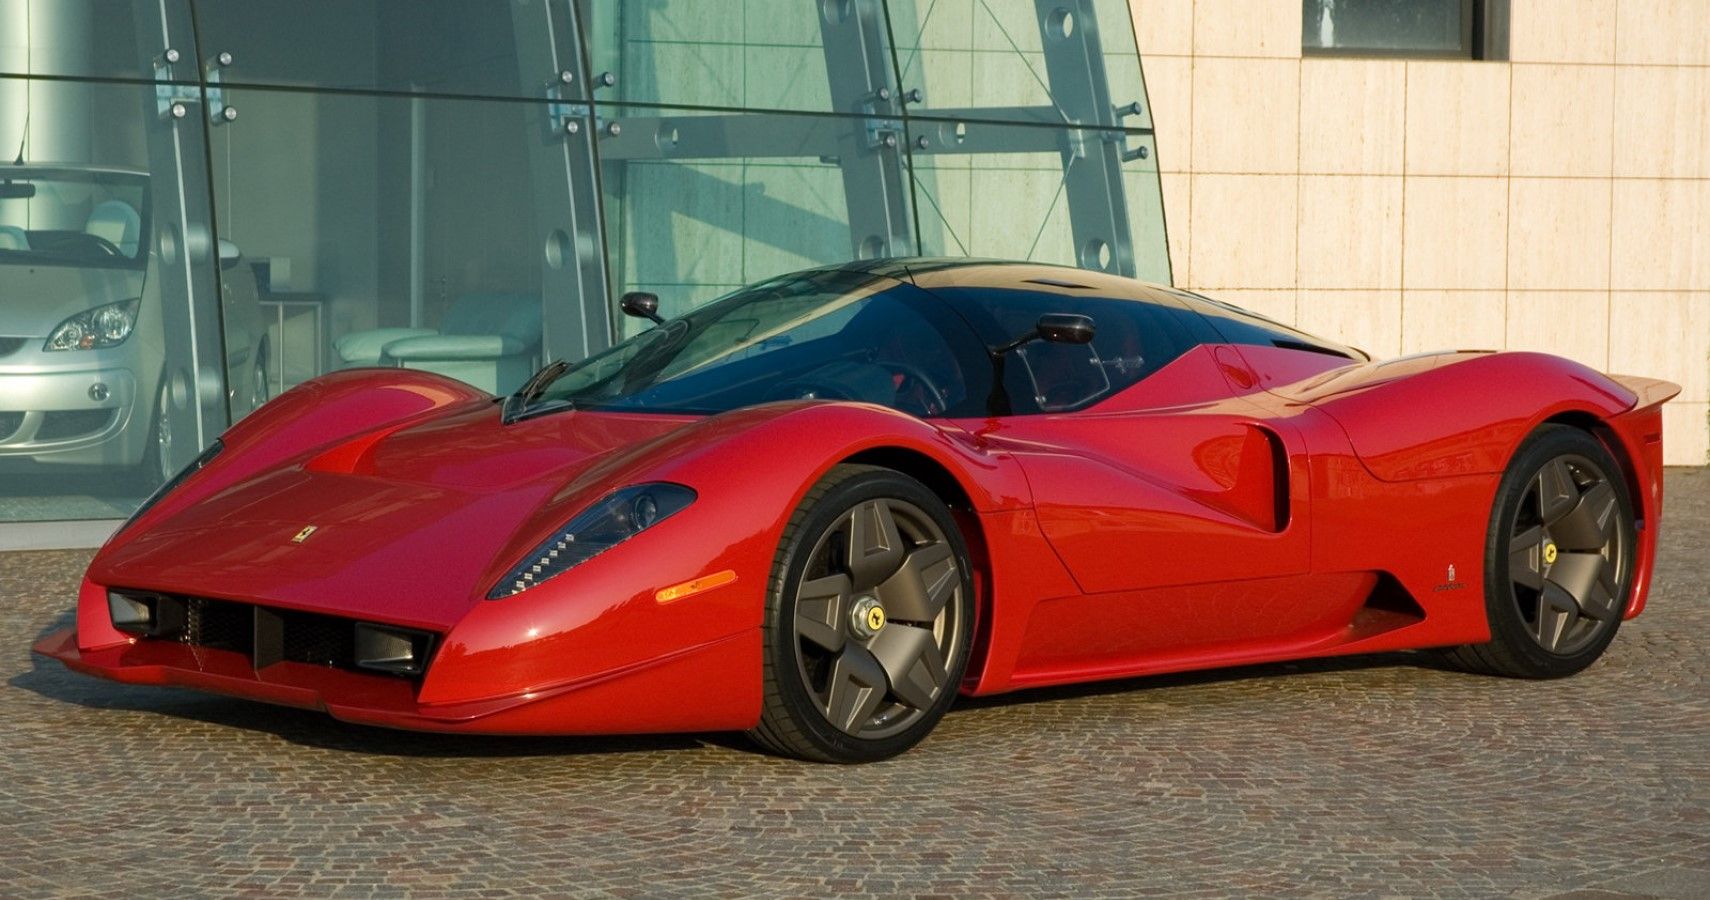 Here's Why The Exclusive Ferrari P4/5 Was Highly Impressive But Not Worth $4 Million